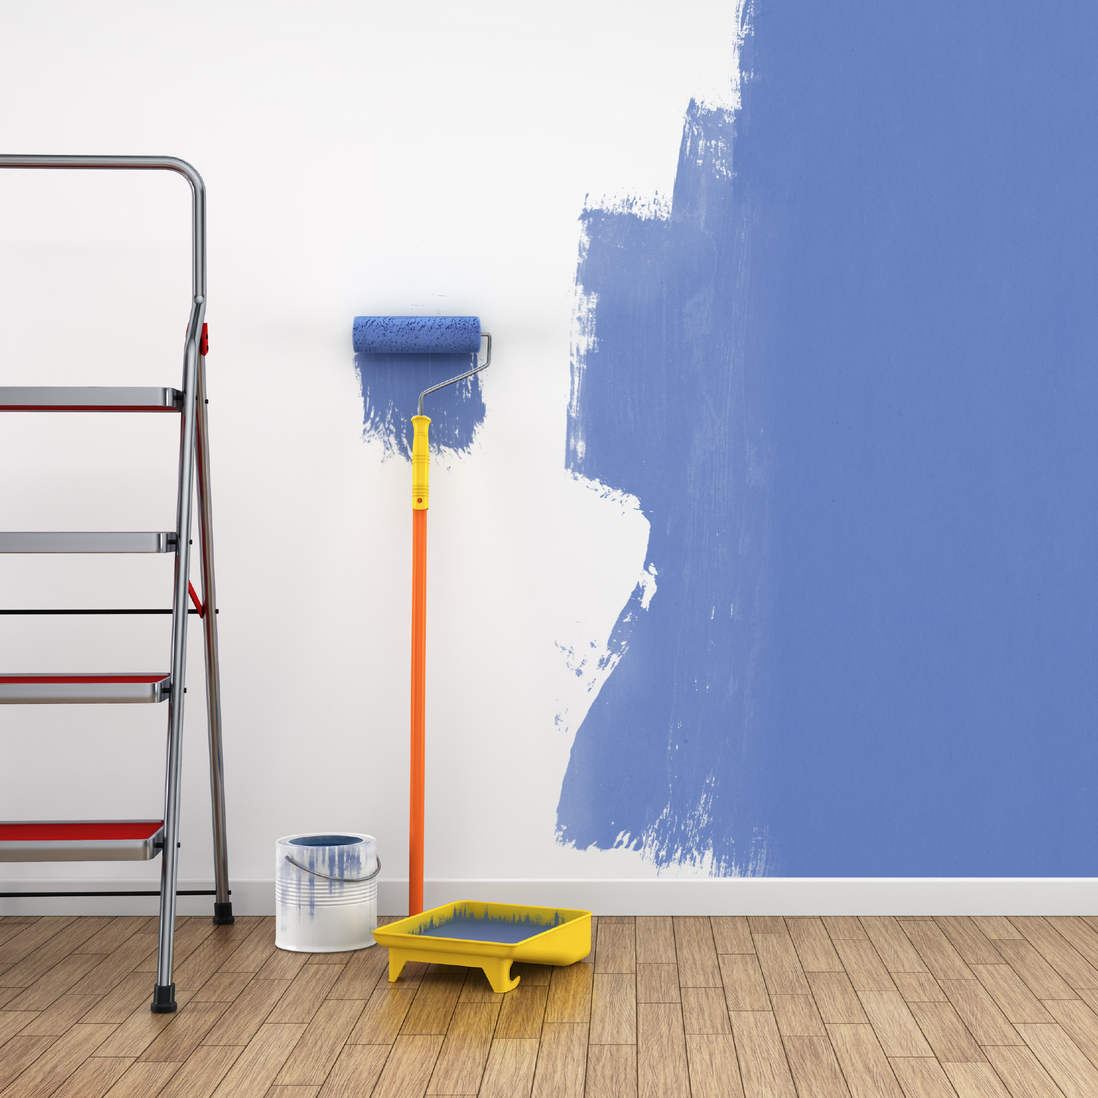 Interior & exterior painting works